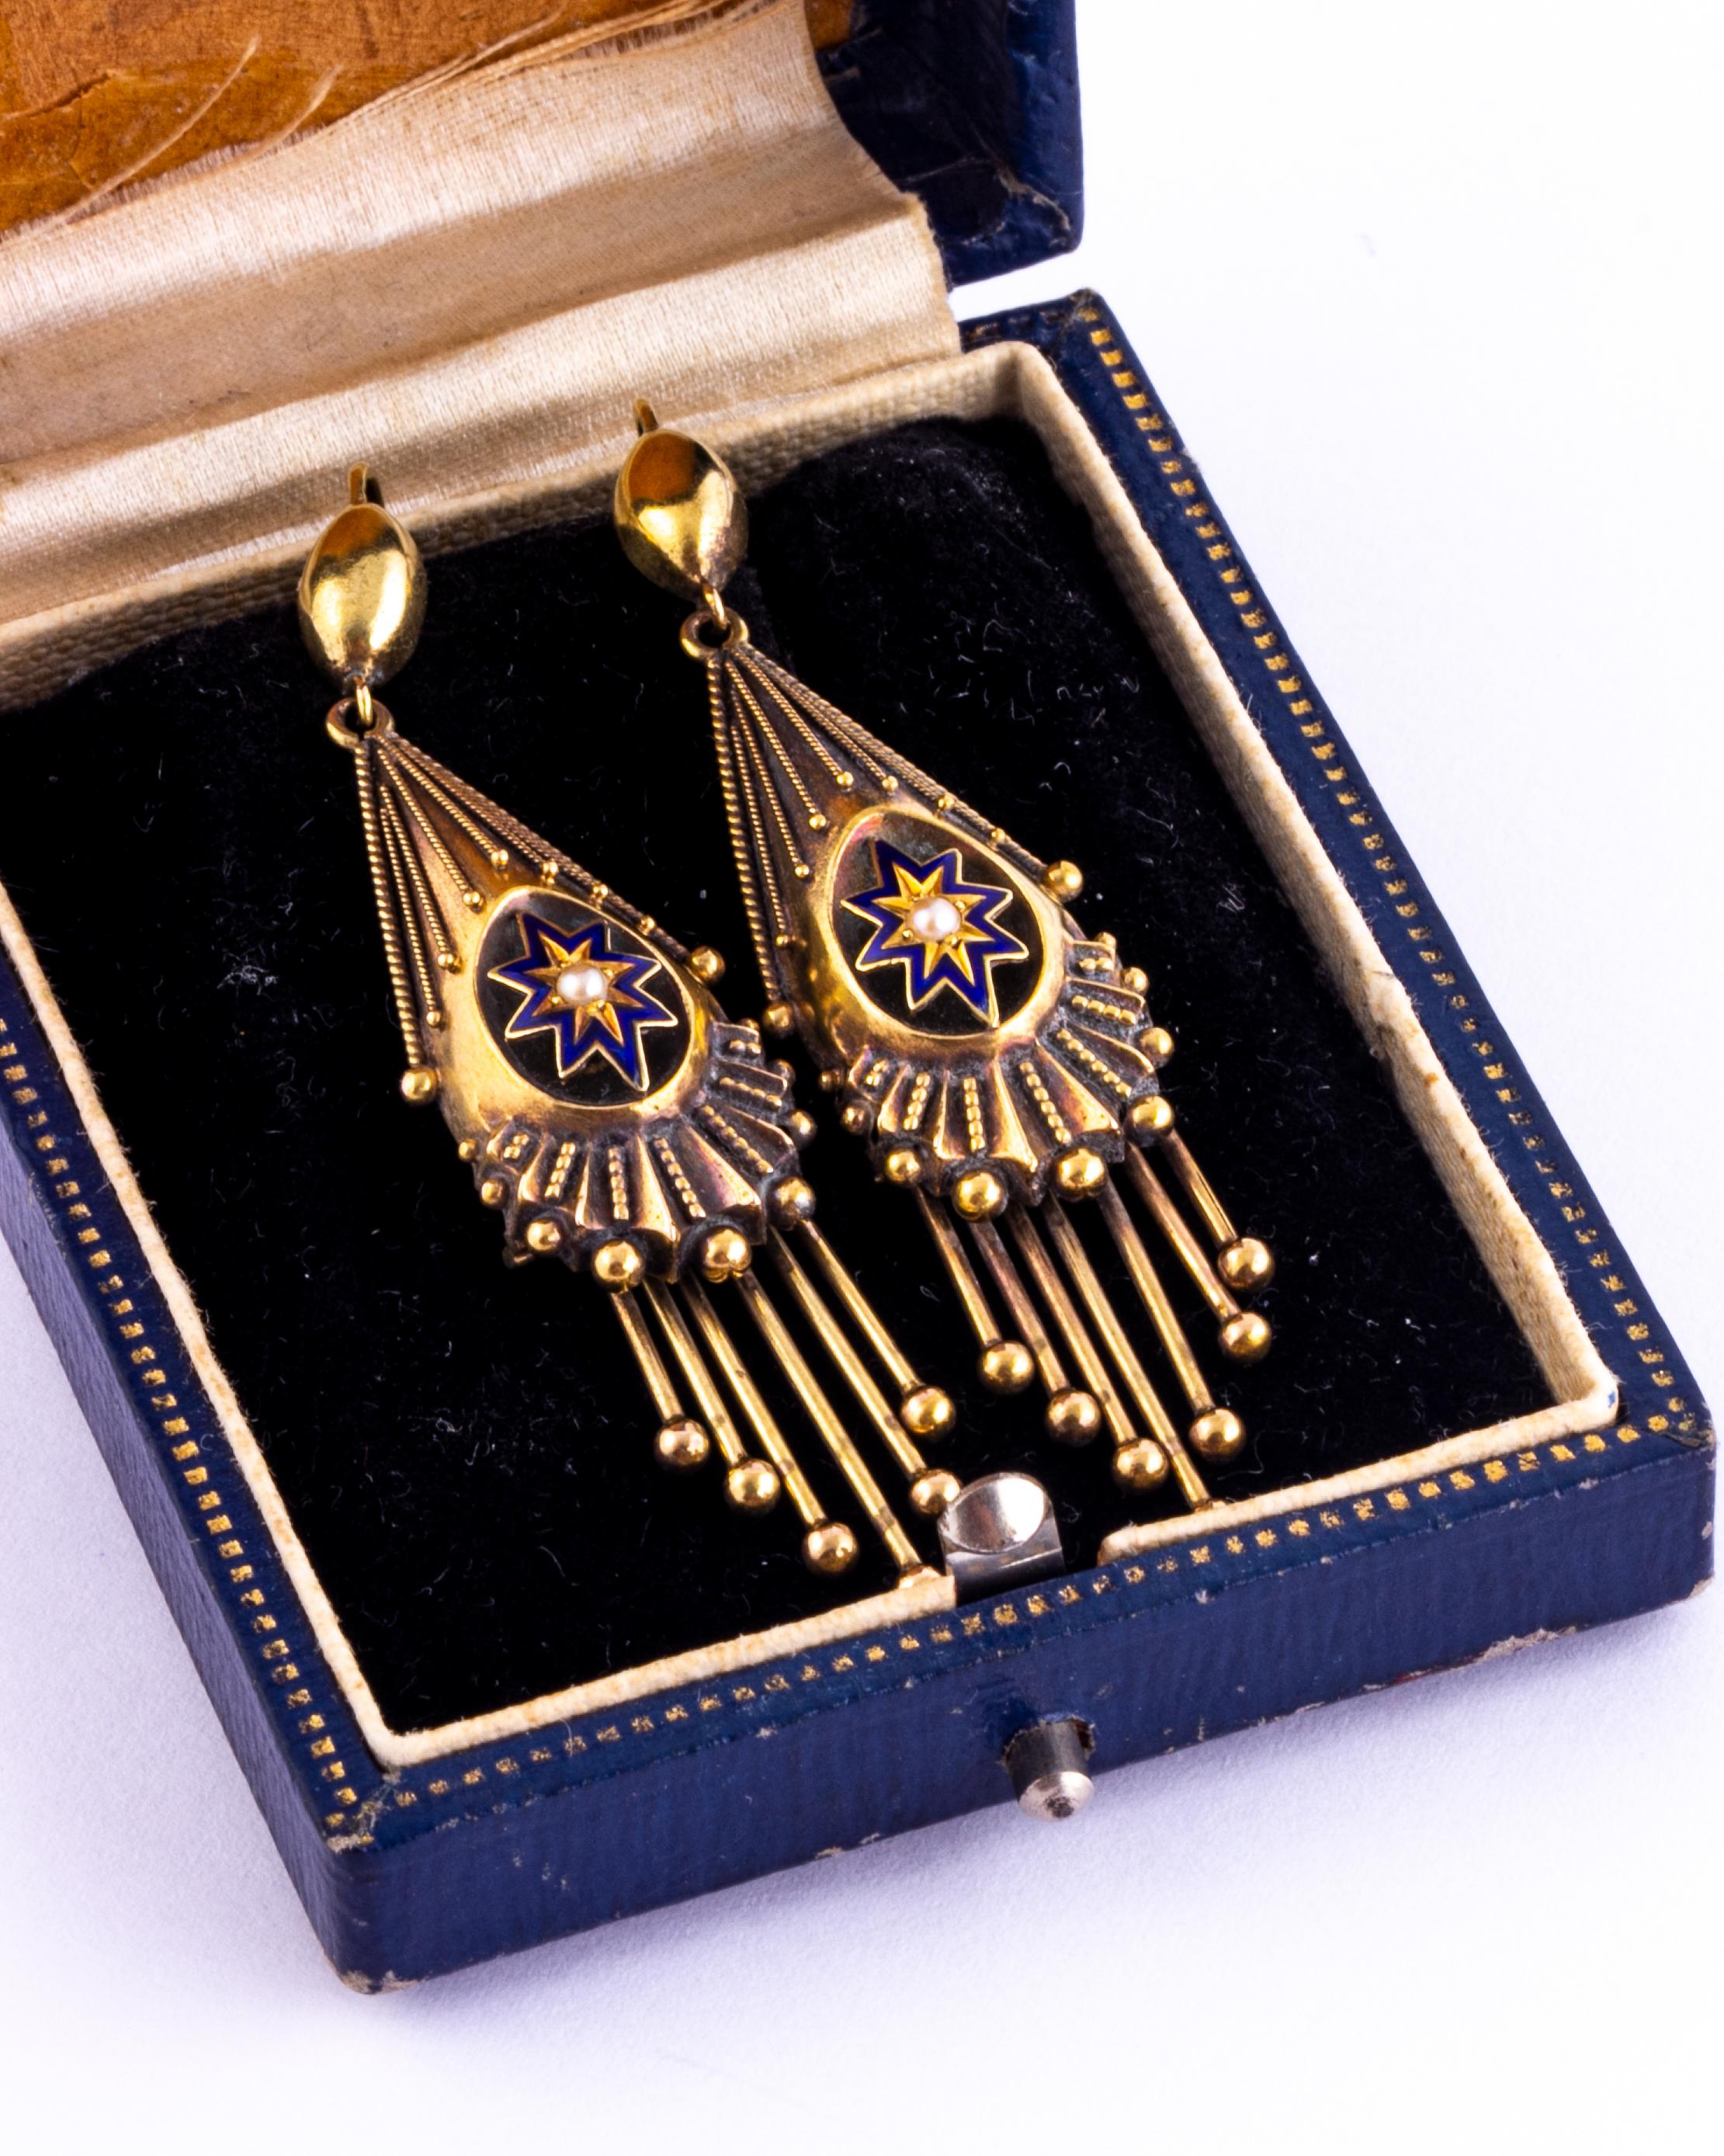 These stunning earrings have a starburst design at the centre which is decorated with blue enamel and a seed pearl. The main earrings themselves have intricate rope twist detail and orbs hanging from them. Modelled in 18ct gold. 

Drop From Ear: